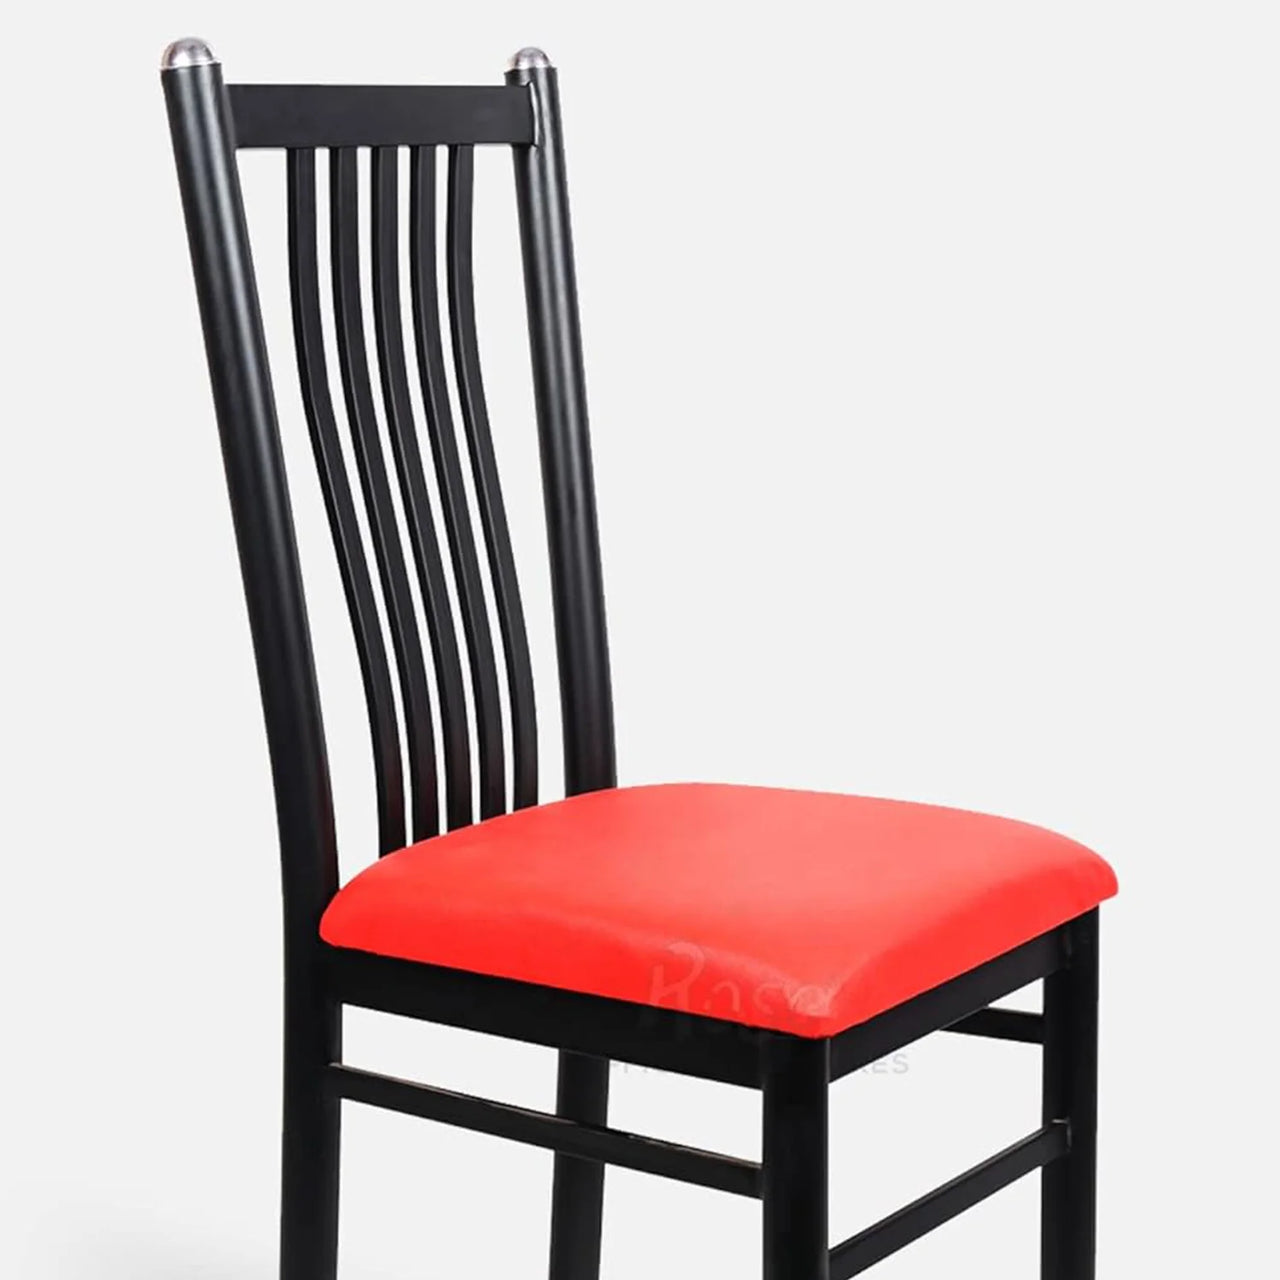 Apollo Dinning Chairs for Kitchen & Dining Room (Red)